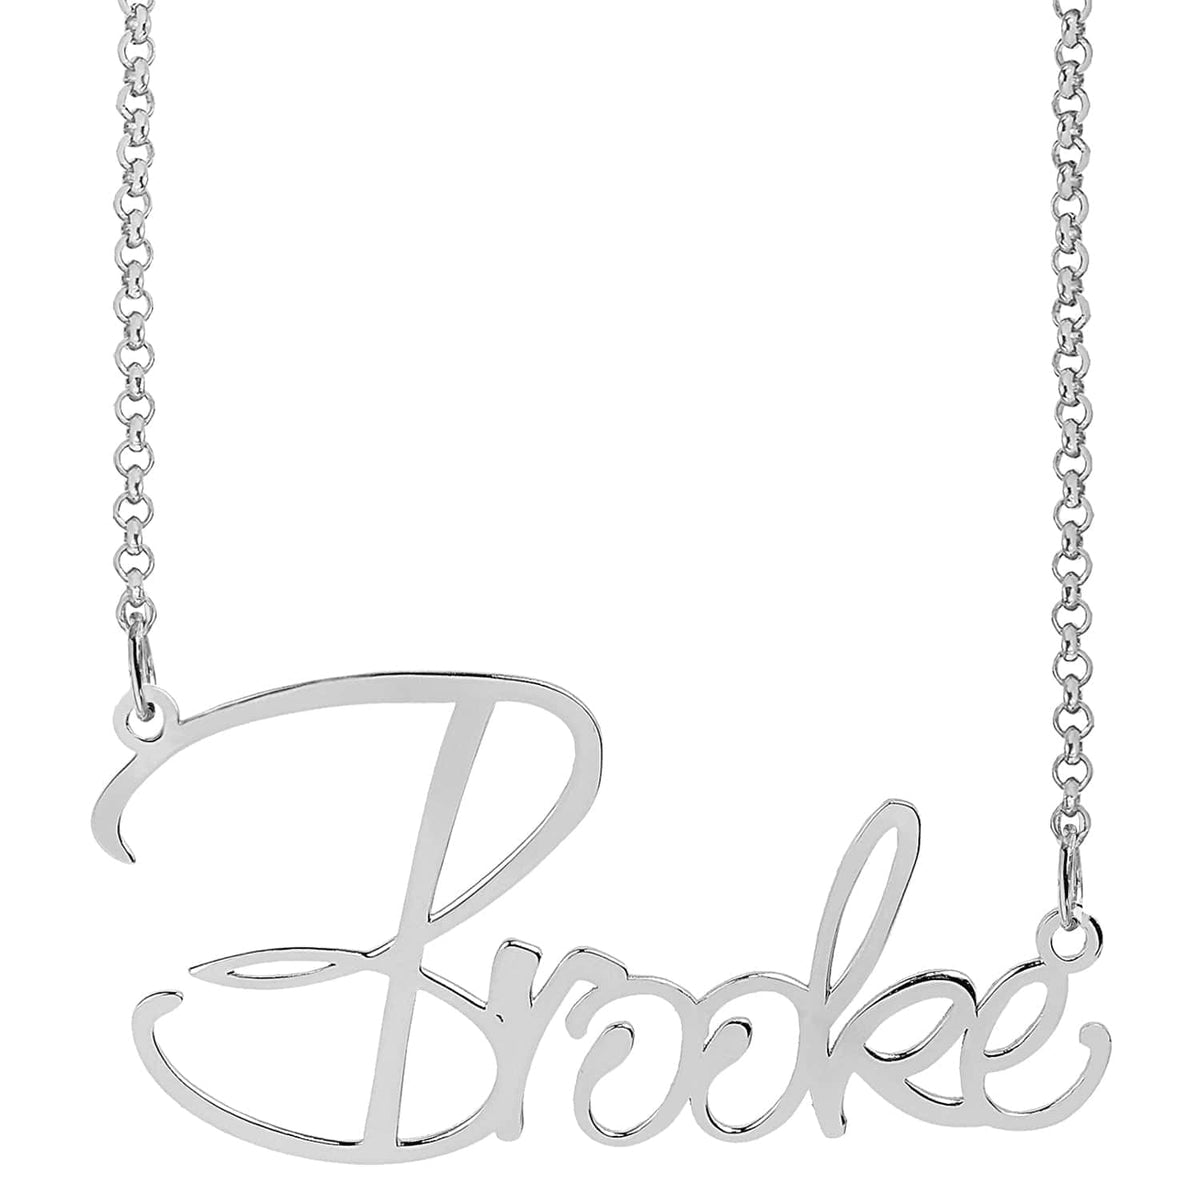 Silver Plated / Rollo Chain &quot;Brooke Style&quot; Name Plate Necklace